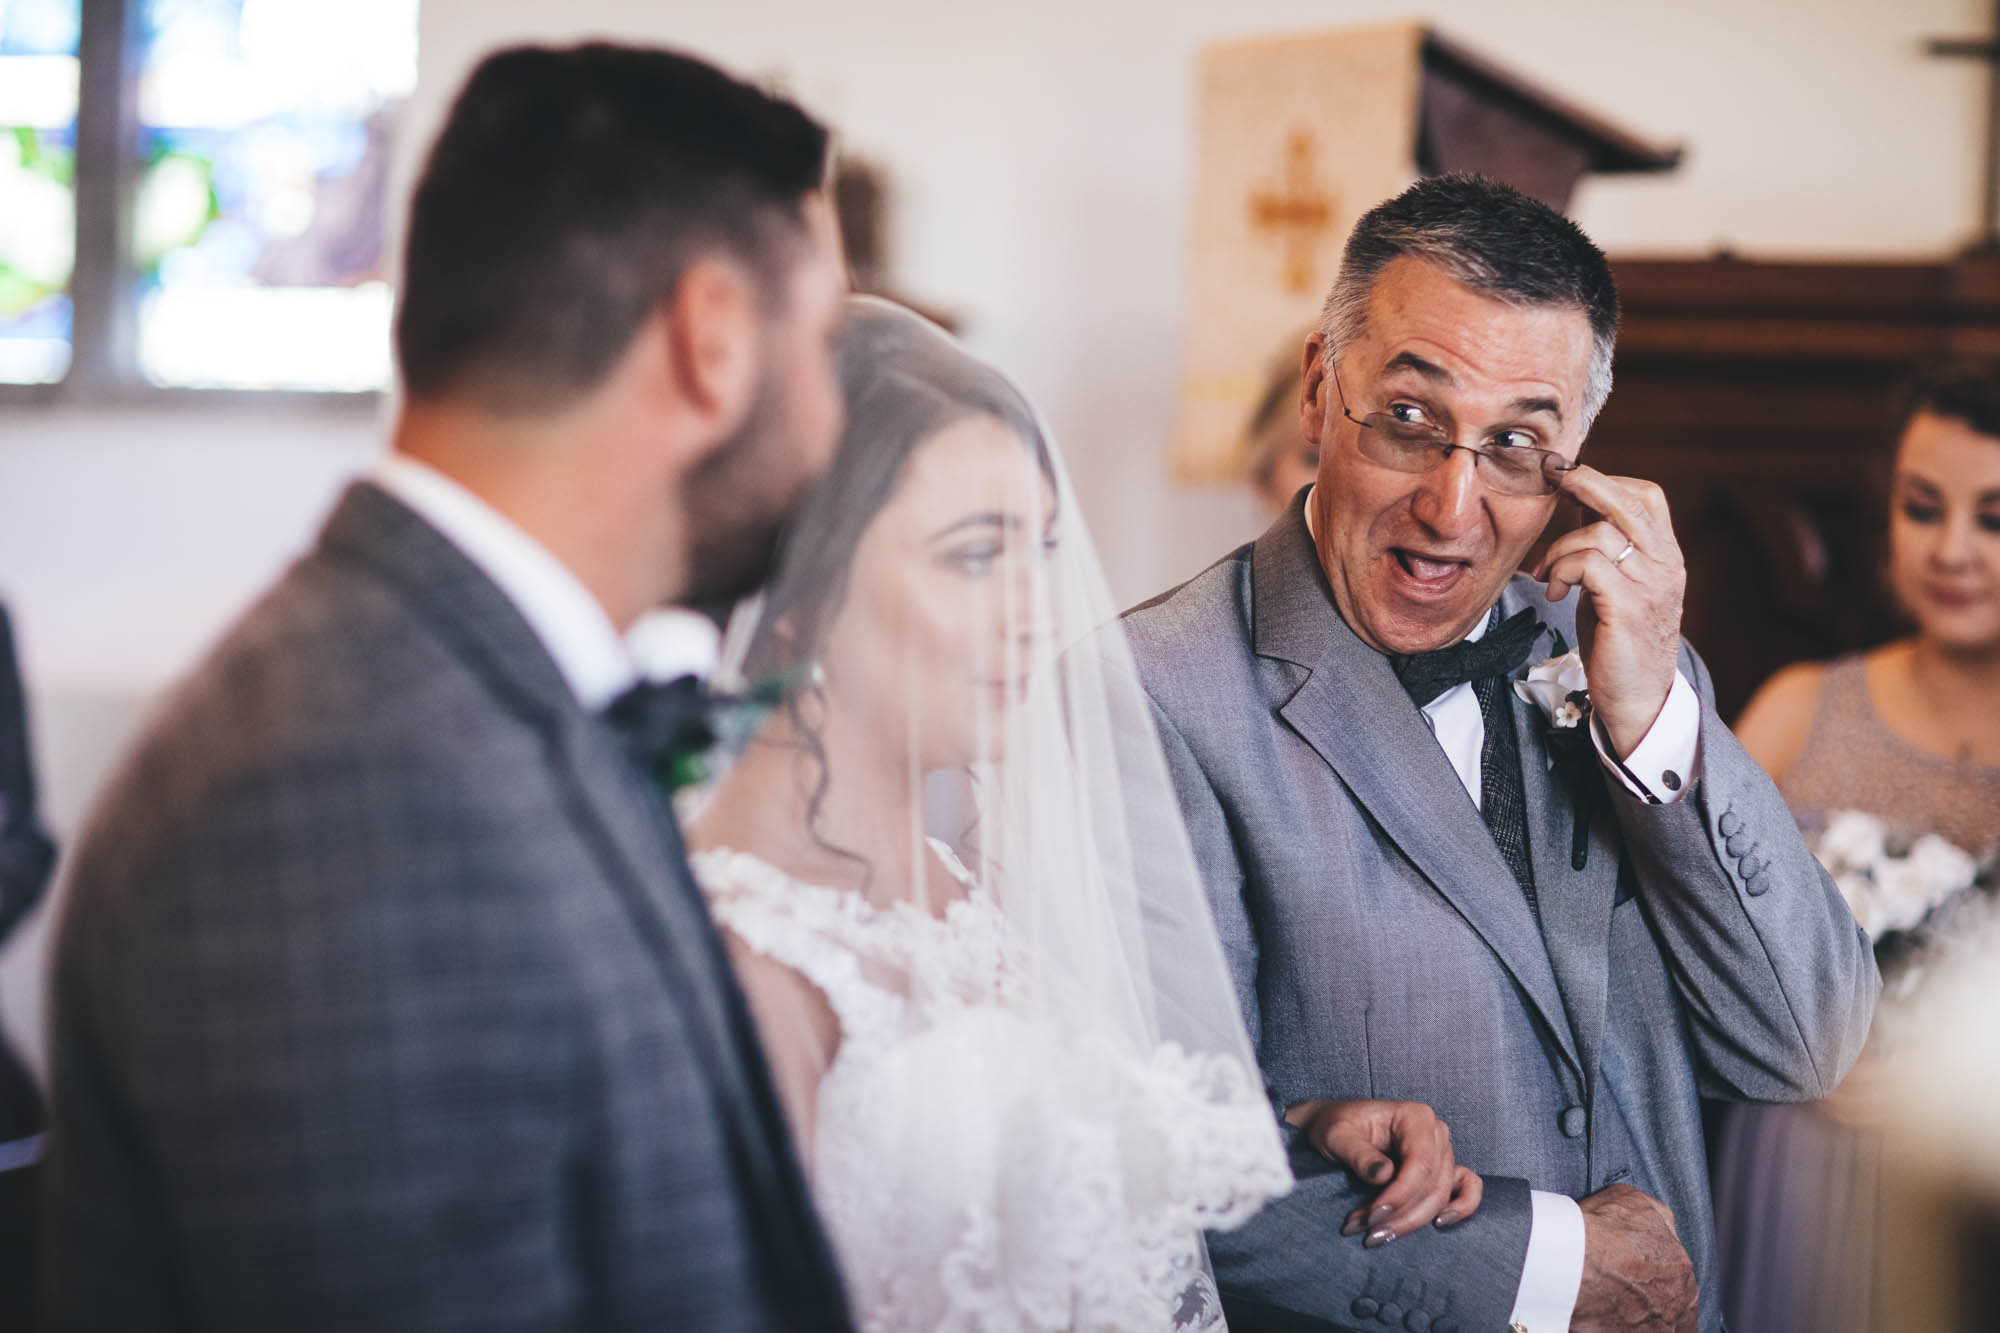 Father of the Bride gives Groom a knowing look as he arrives at the altar with his daughter